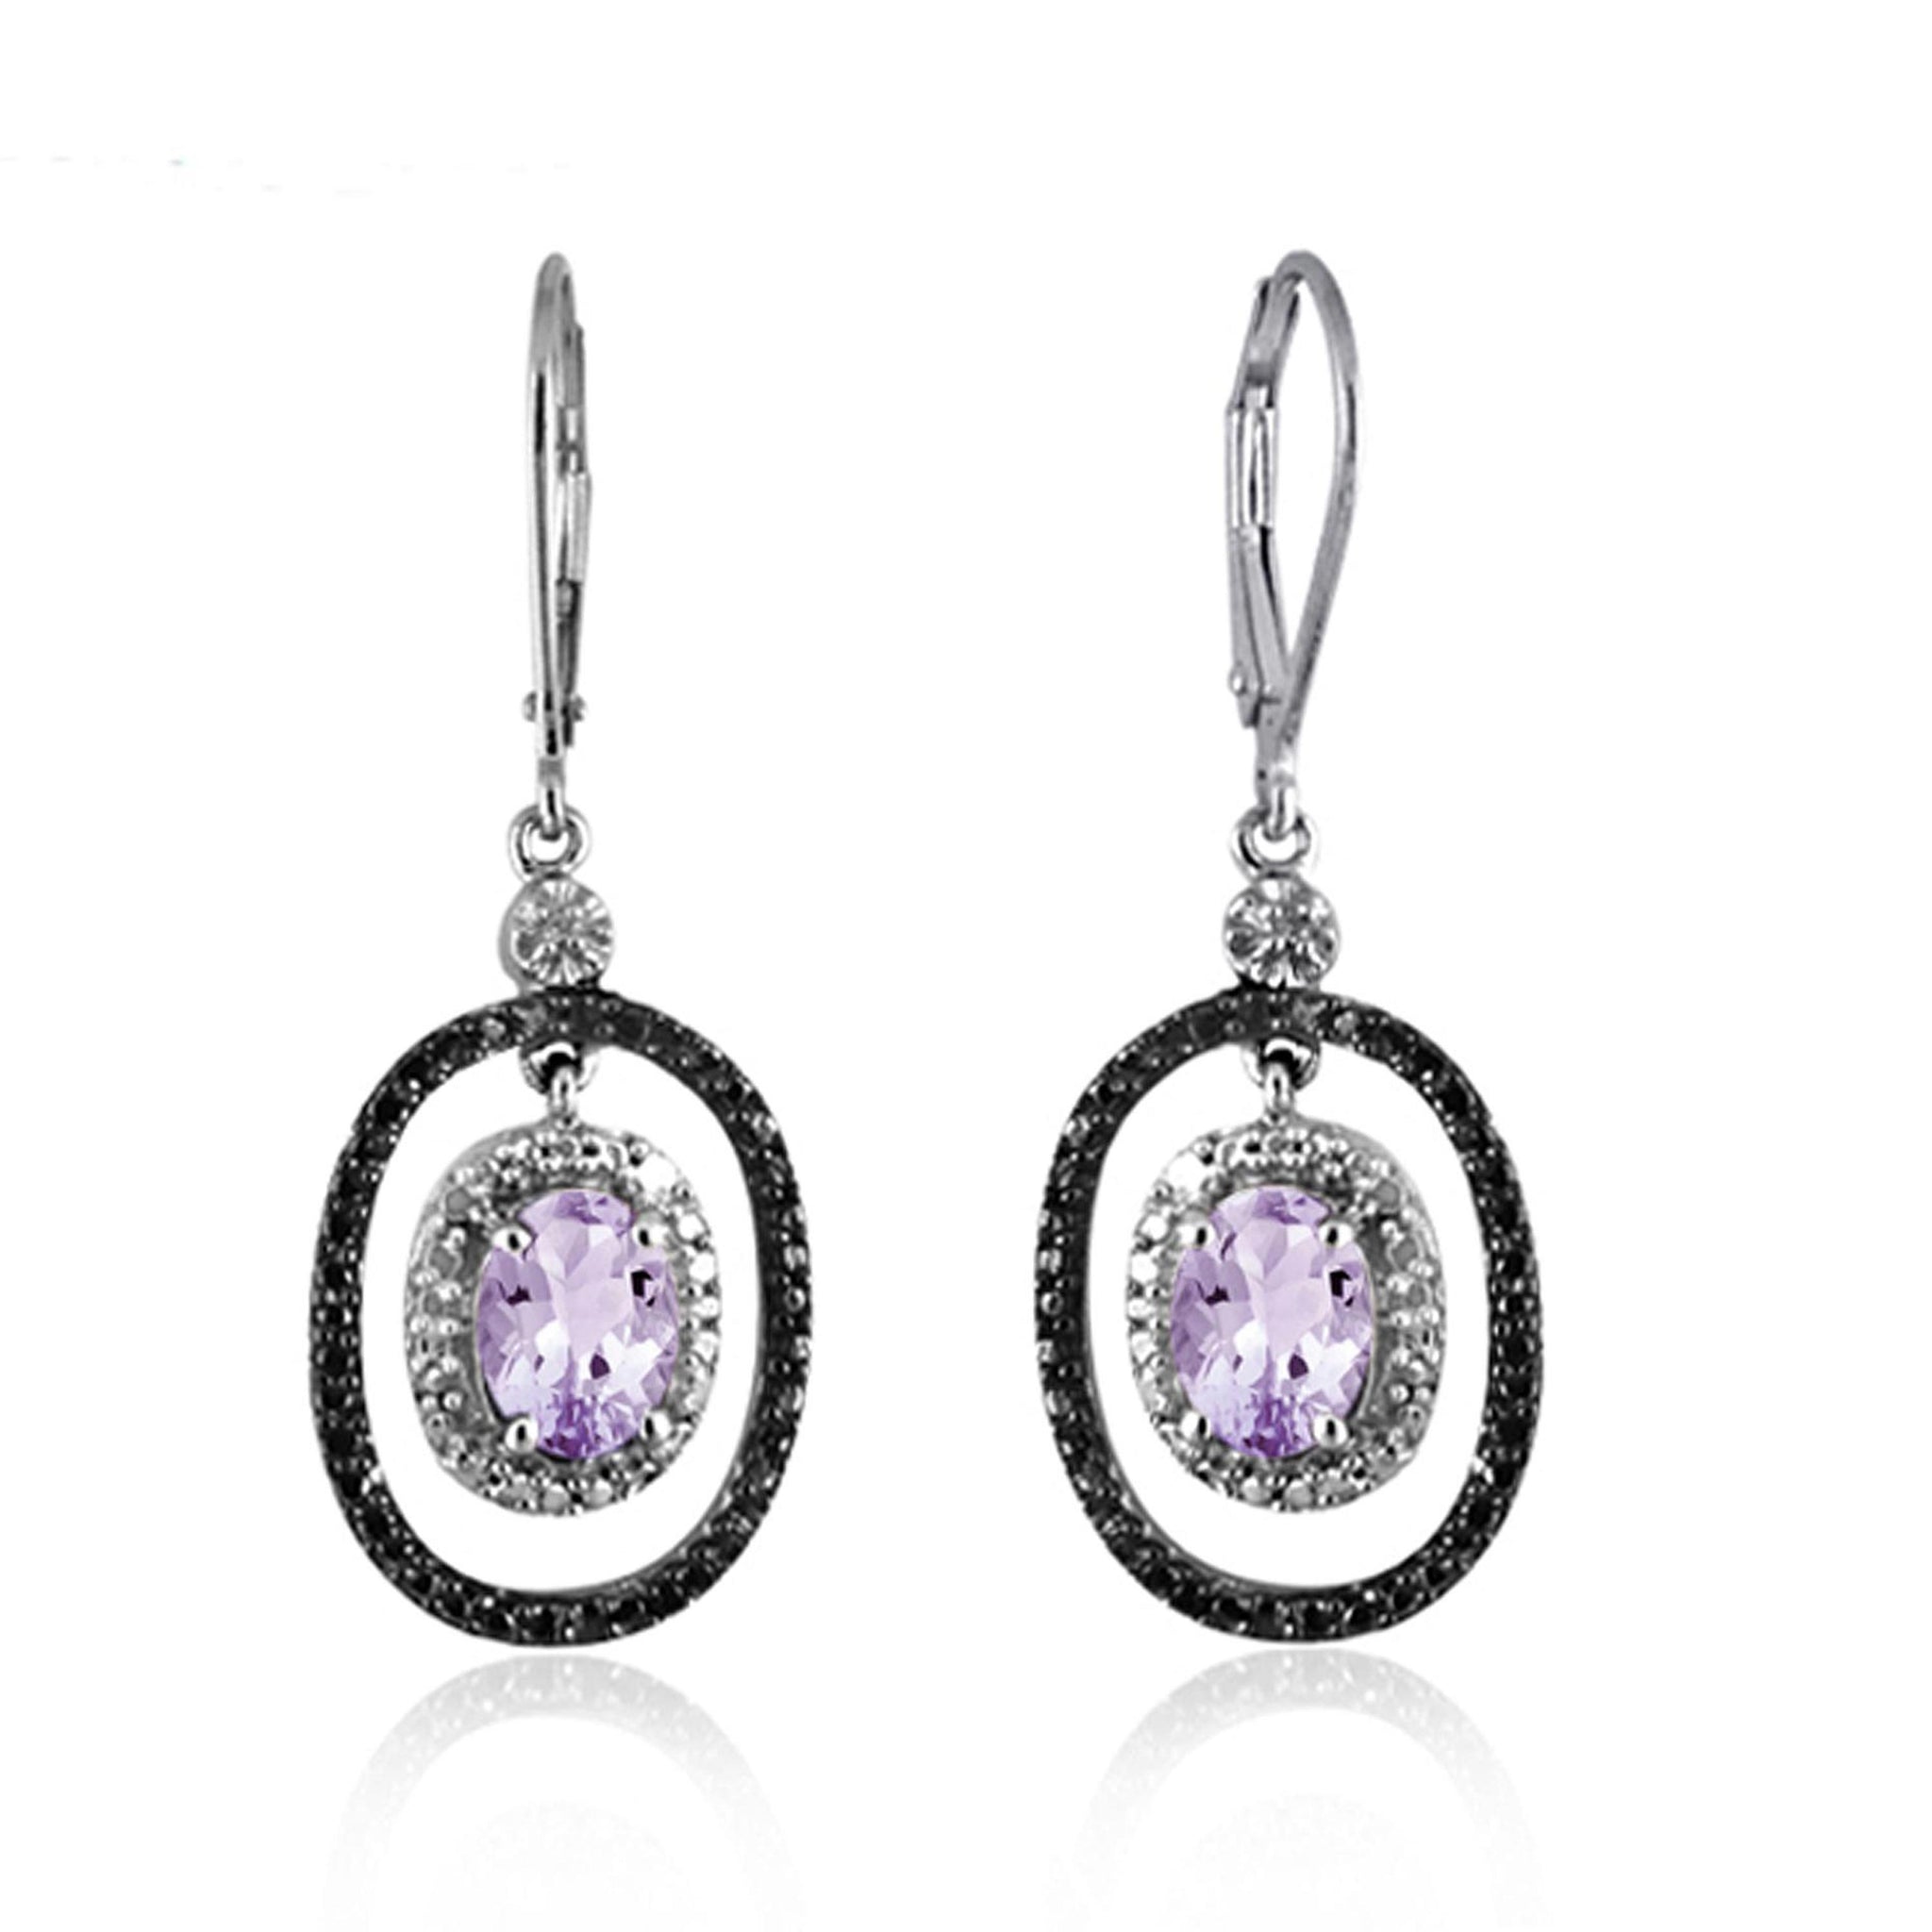 JewelonFire 2 1/5 Carat T.G.W. Pink Amethyst And White Diamond Accent Sterling Silver Dangle Earrings - Assorted Colors